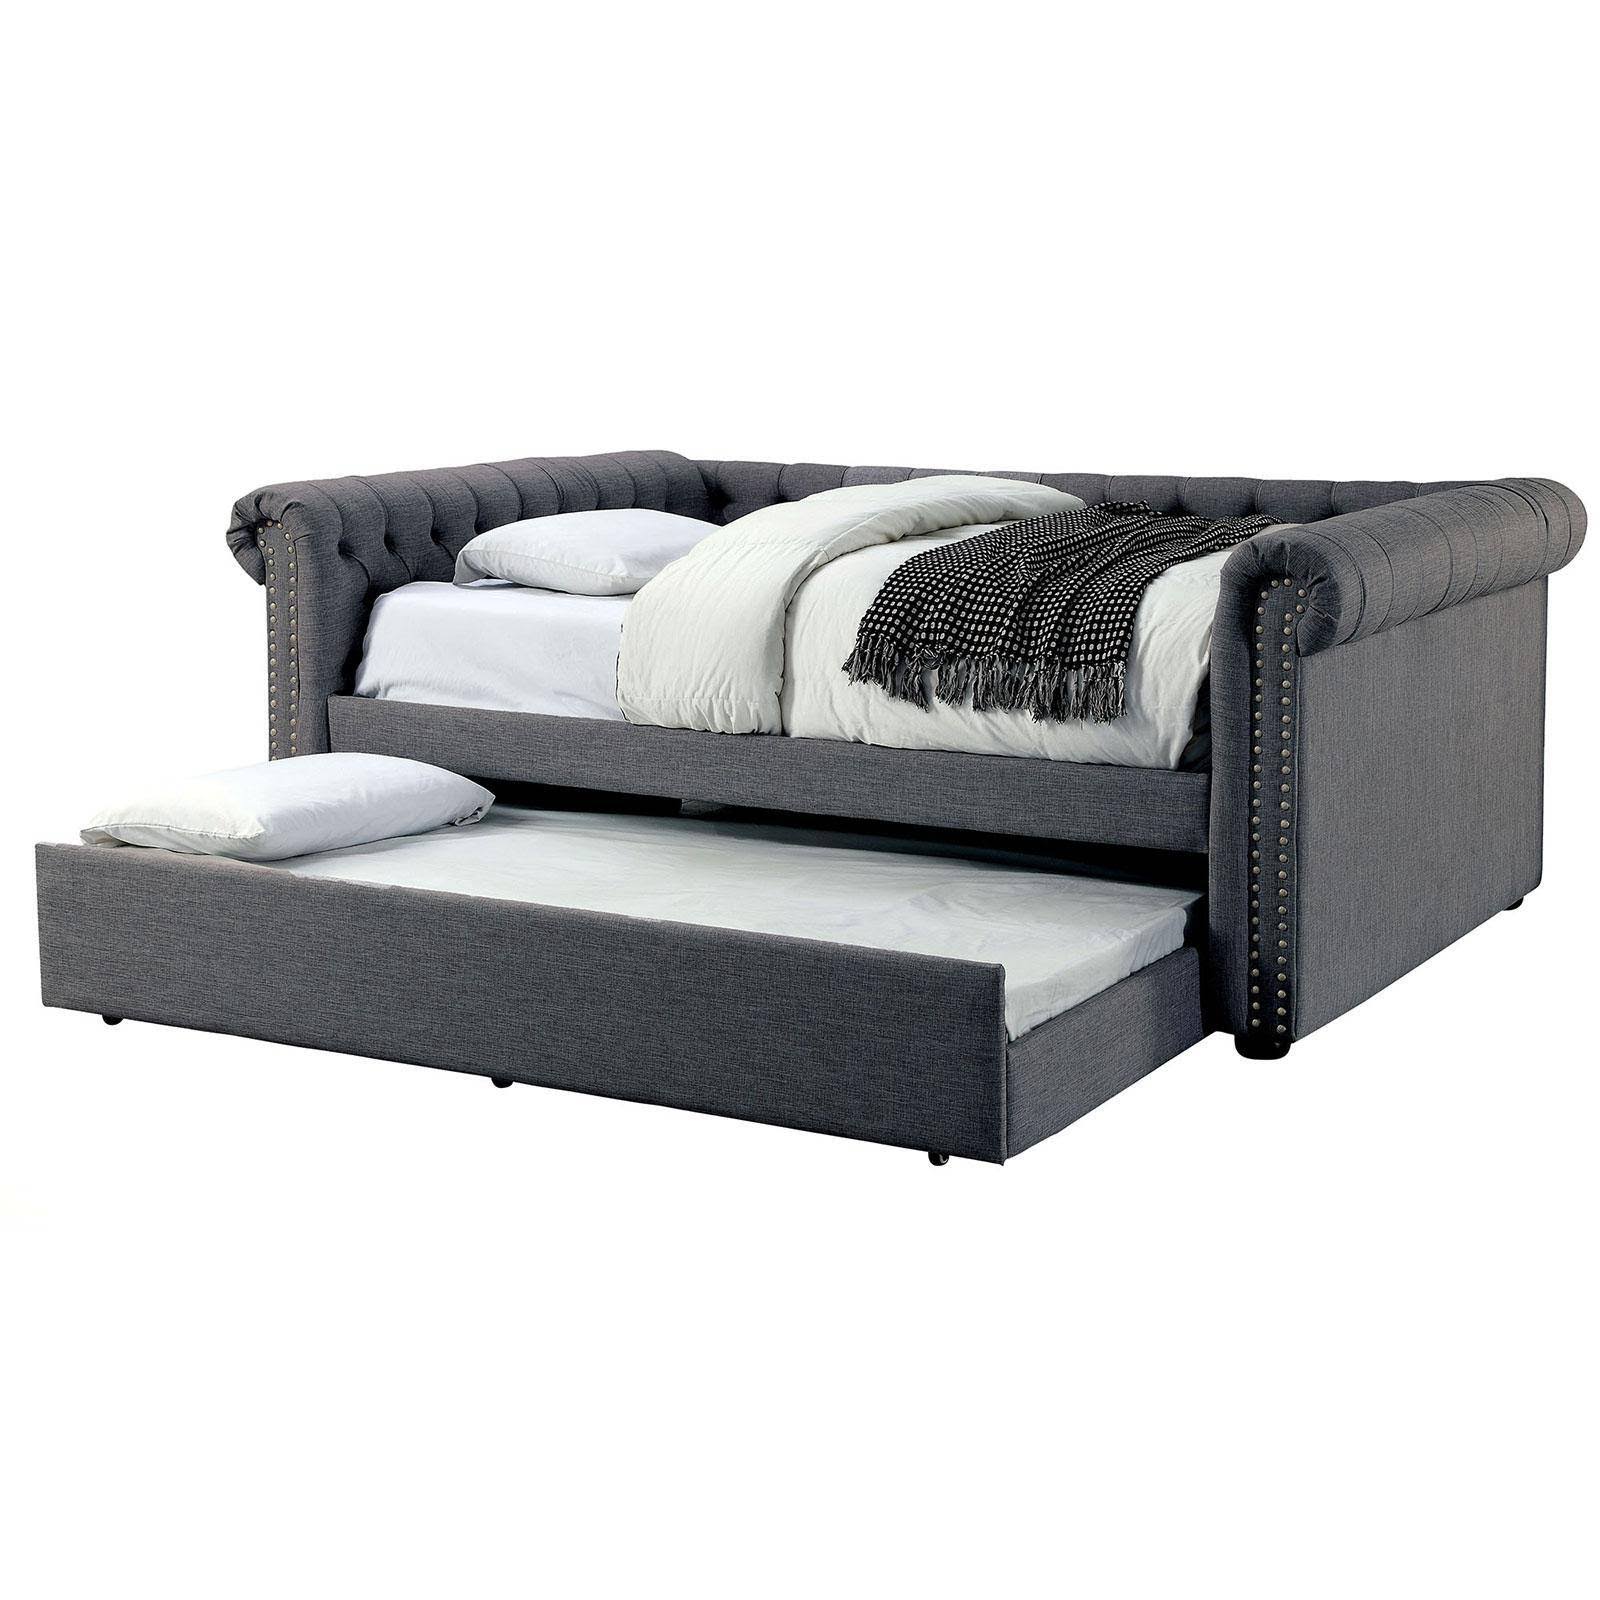 Leanna Gray Queen Trundle Daybed - WGL-1-s